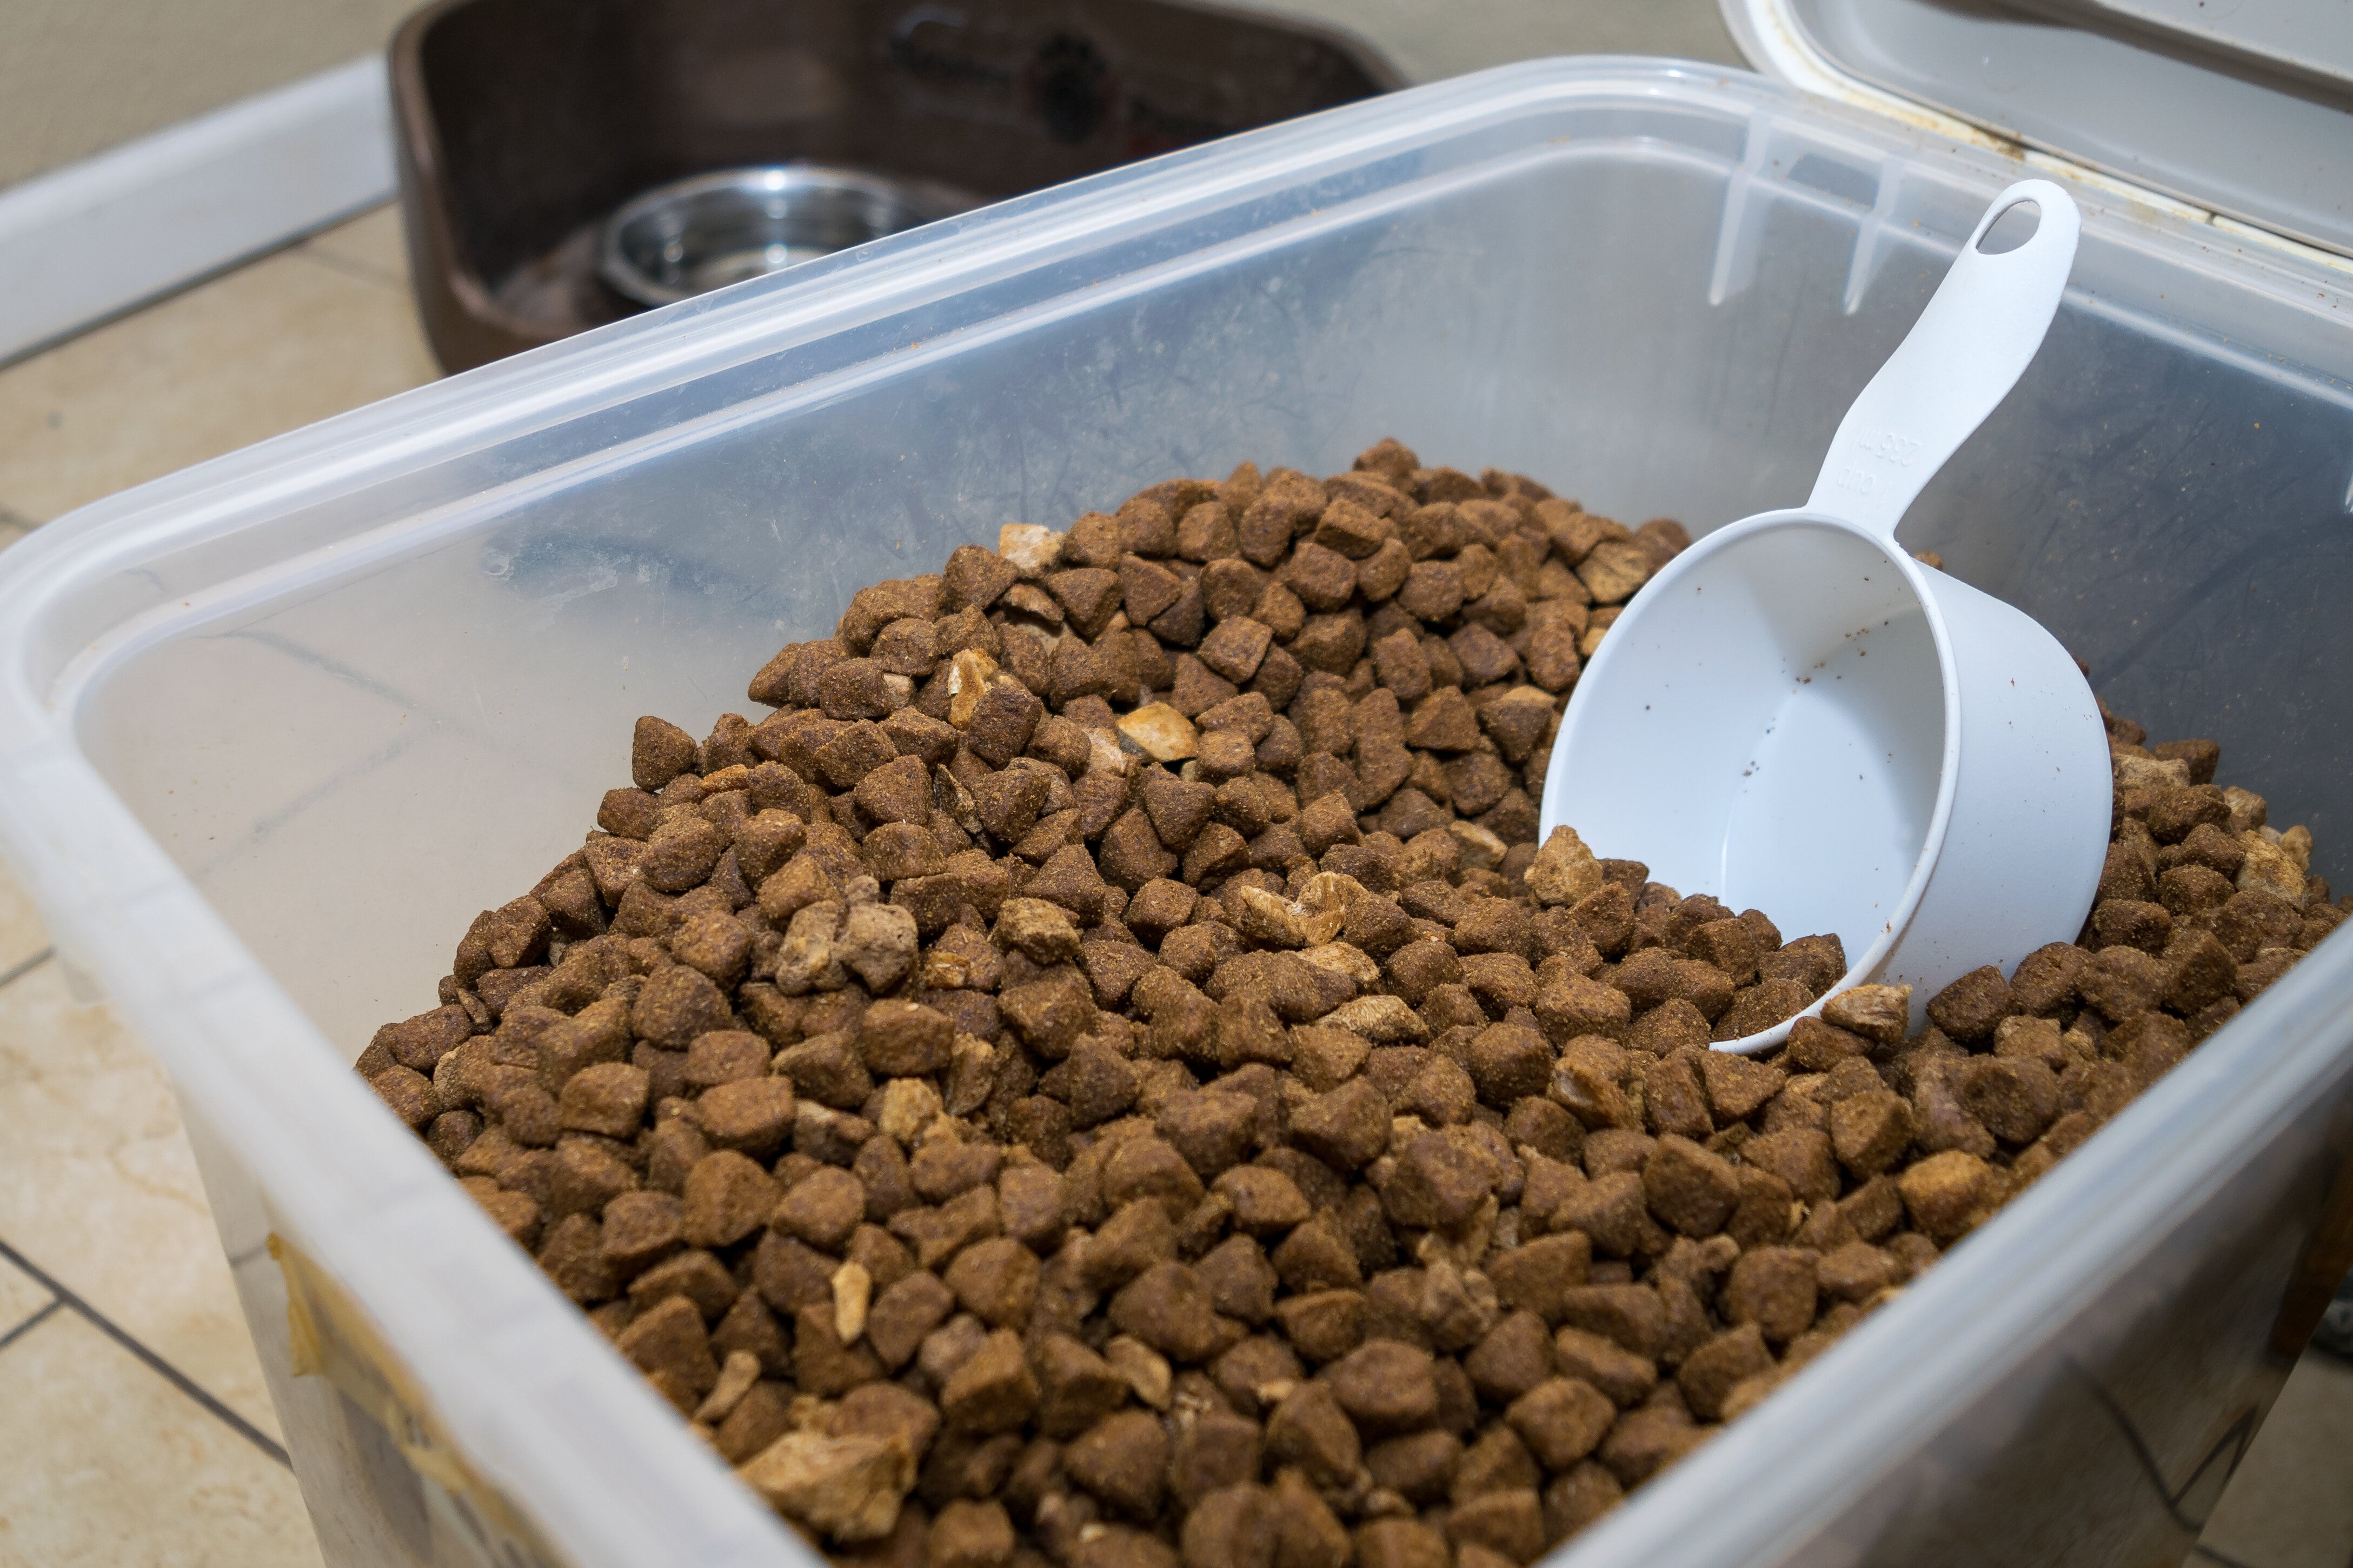 Can Insect Bioconversion Provide A Sustainable Supply of Protein For Cats, Dogs And Exotic Pets?